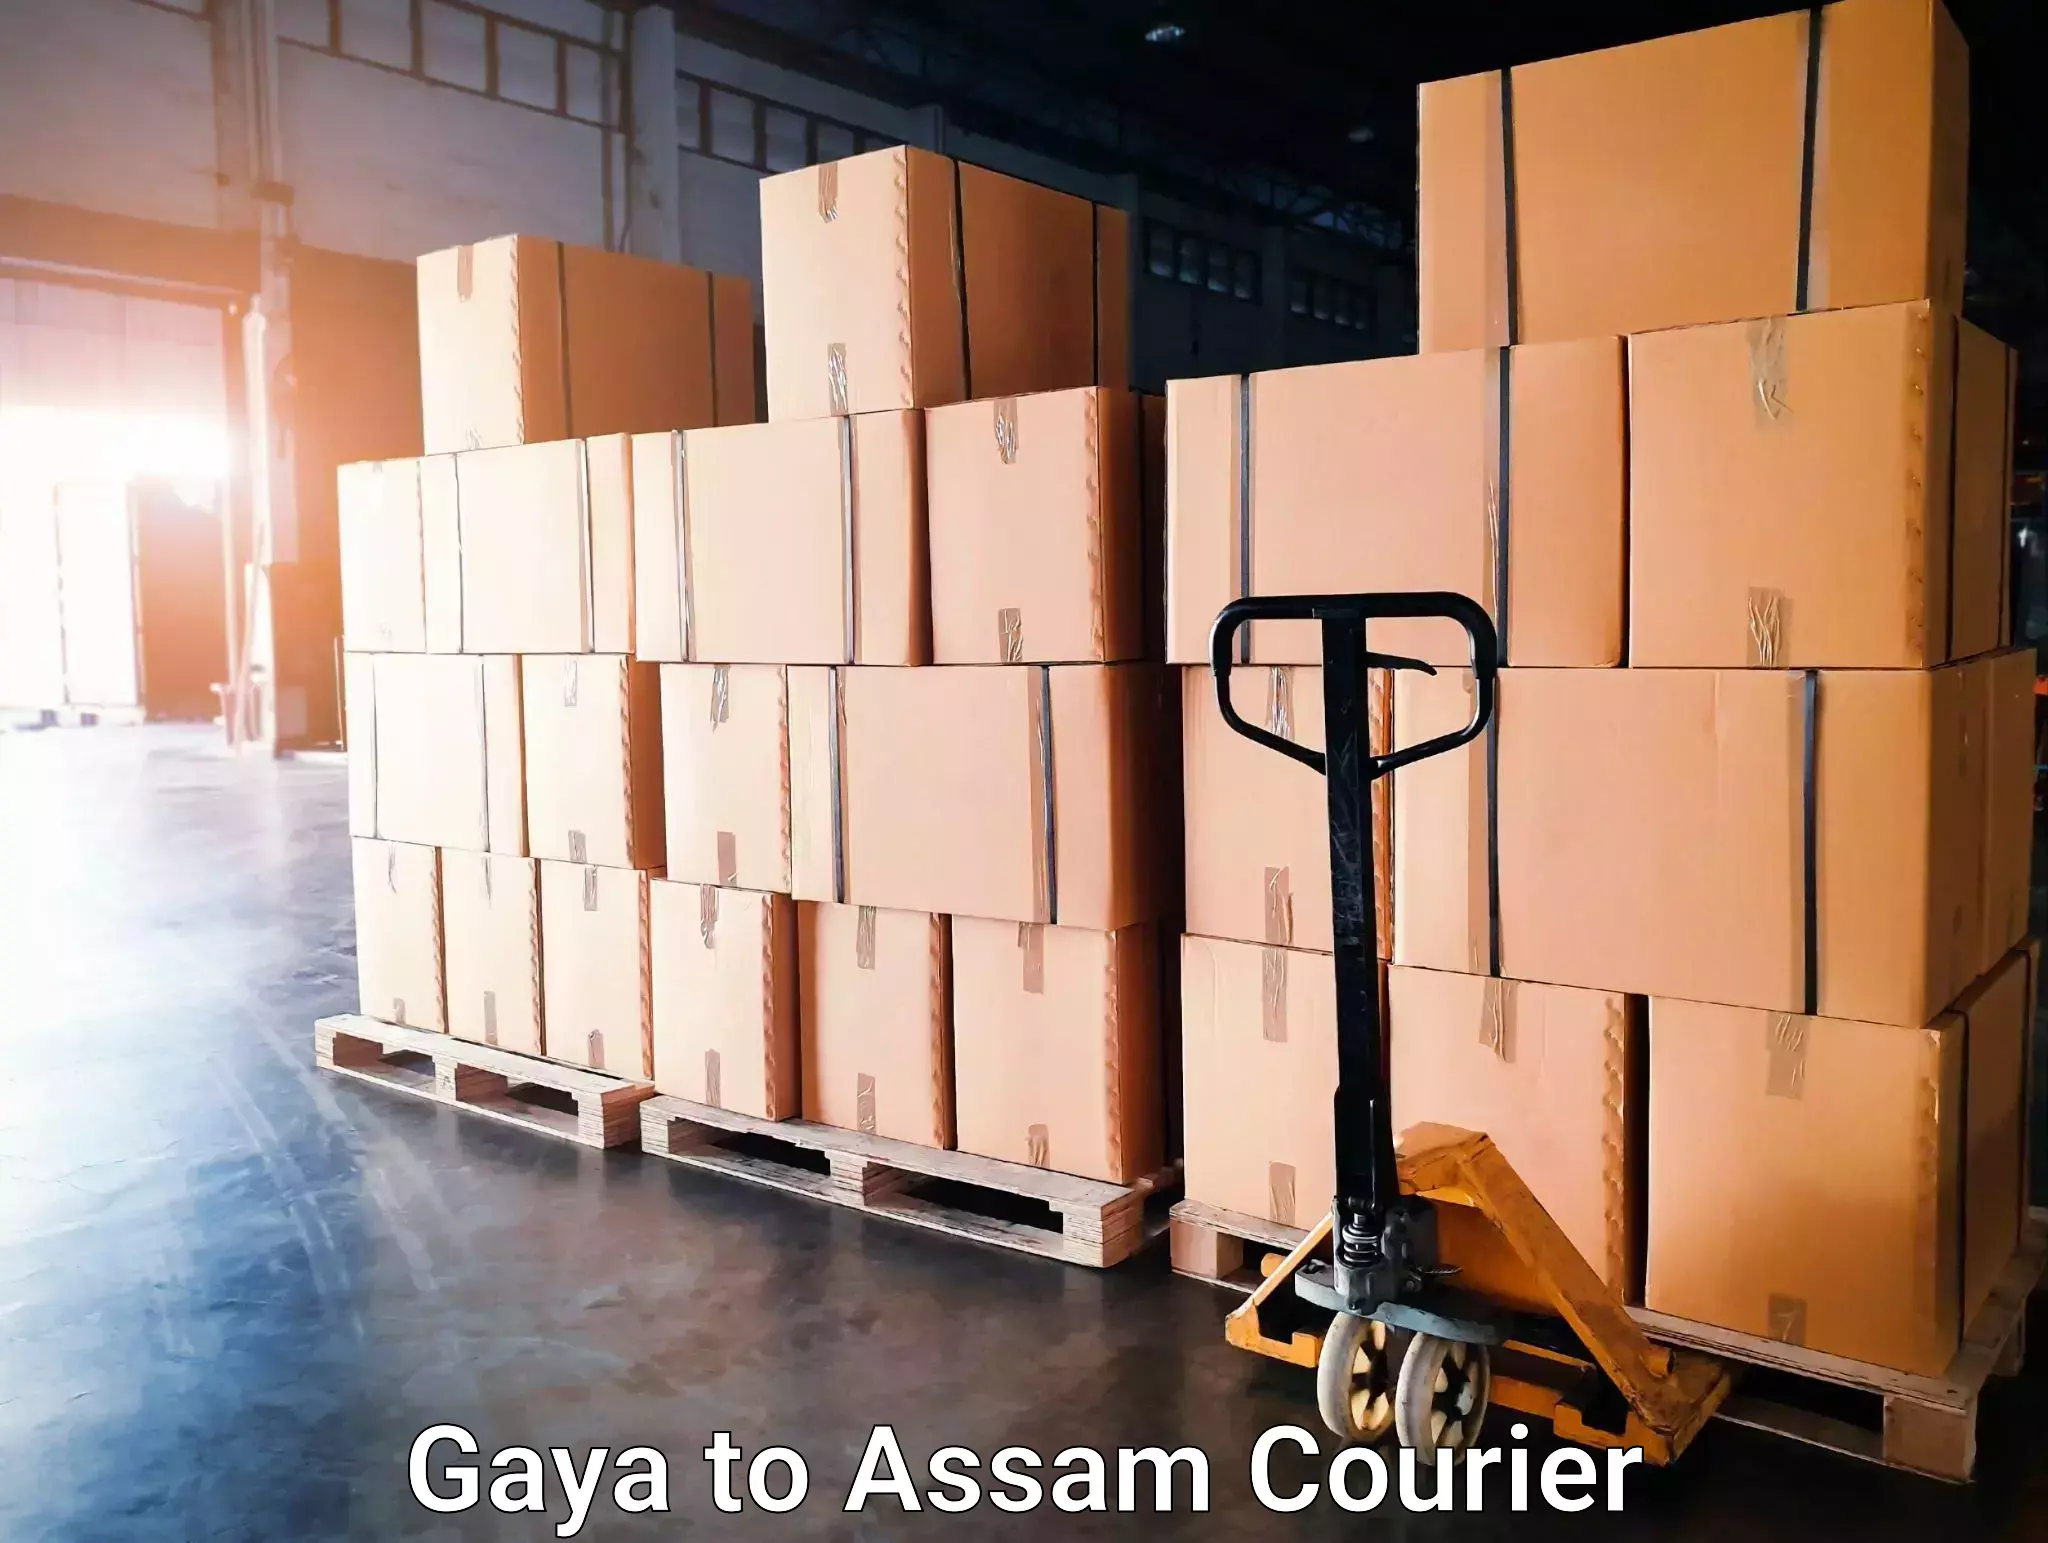 Trusted relocation experts Gaya to Assam